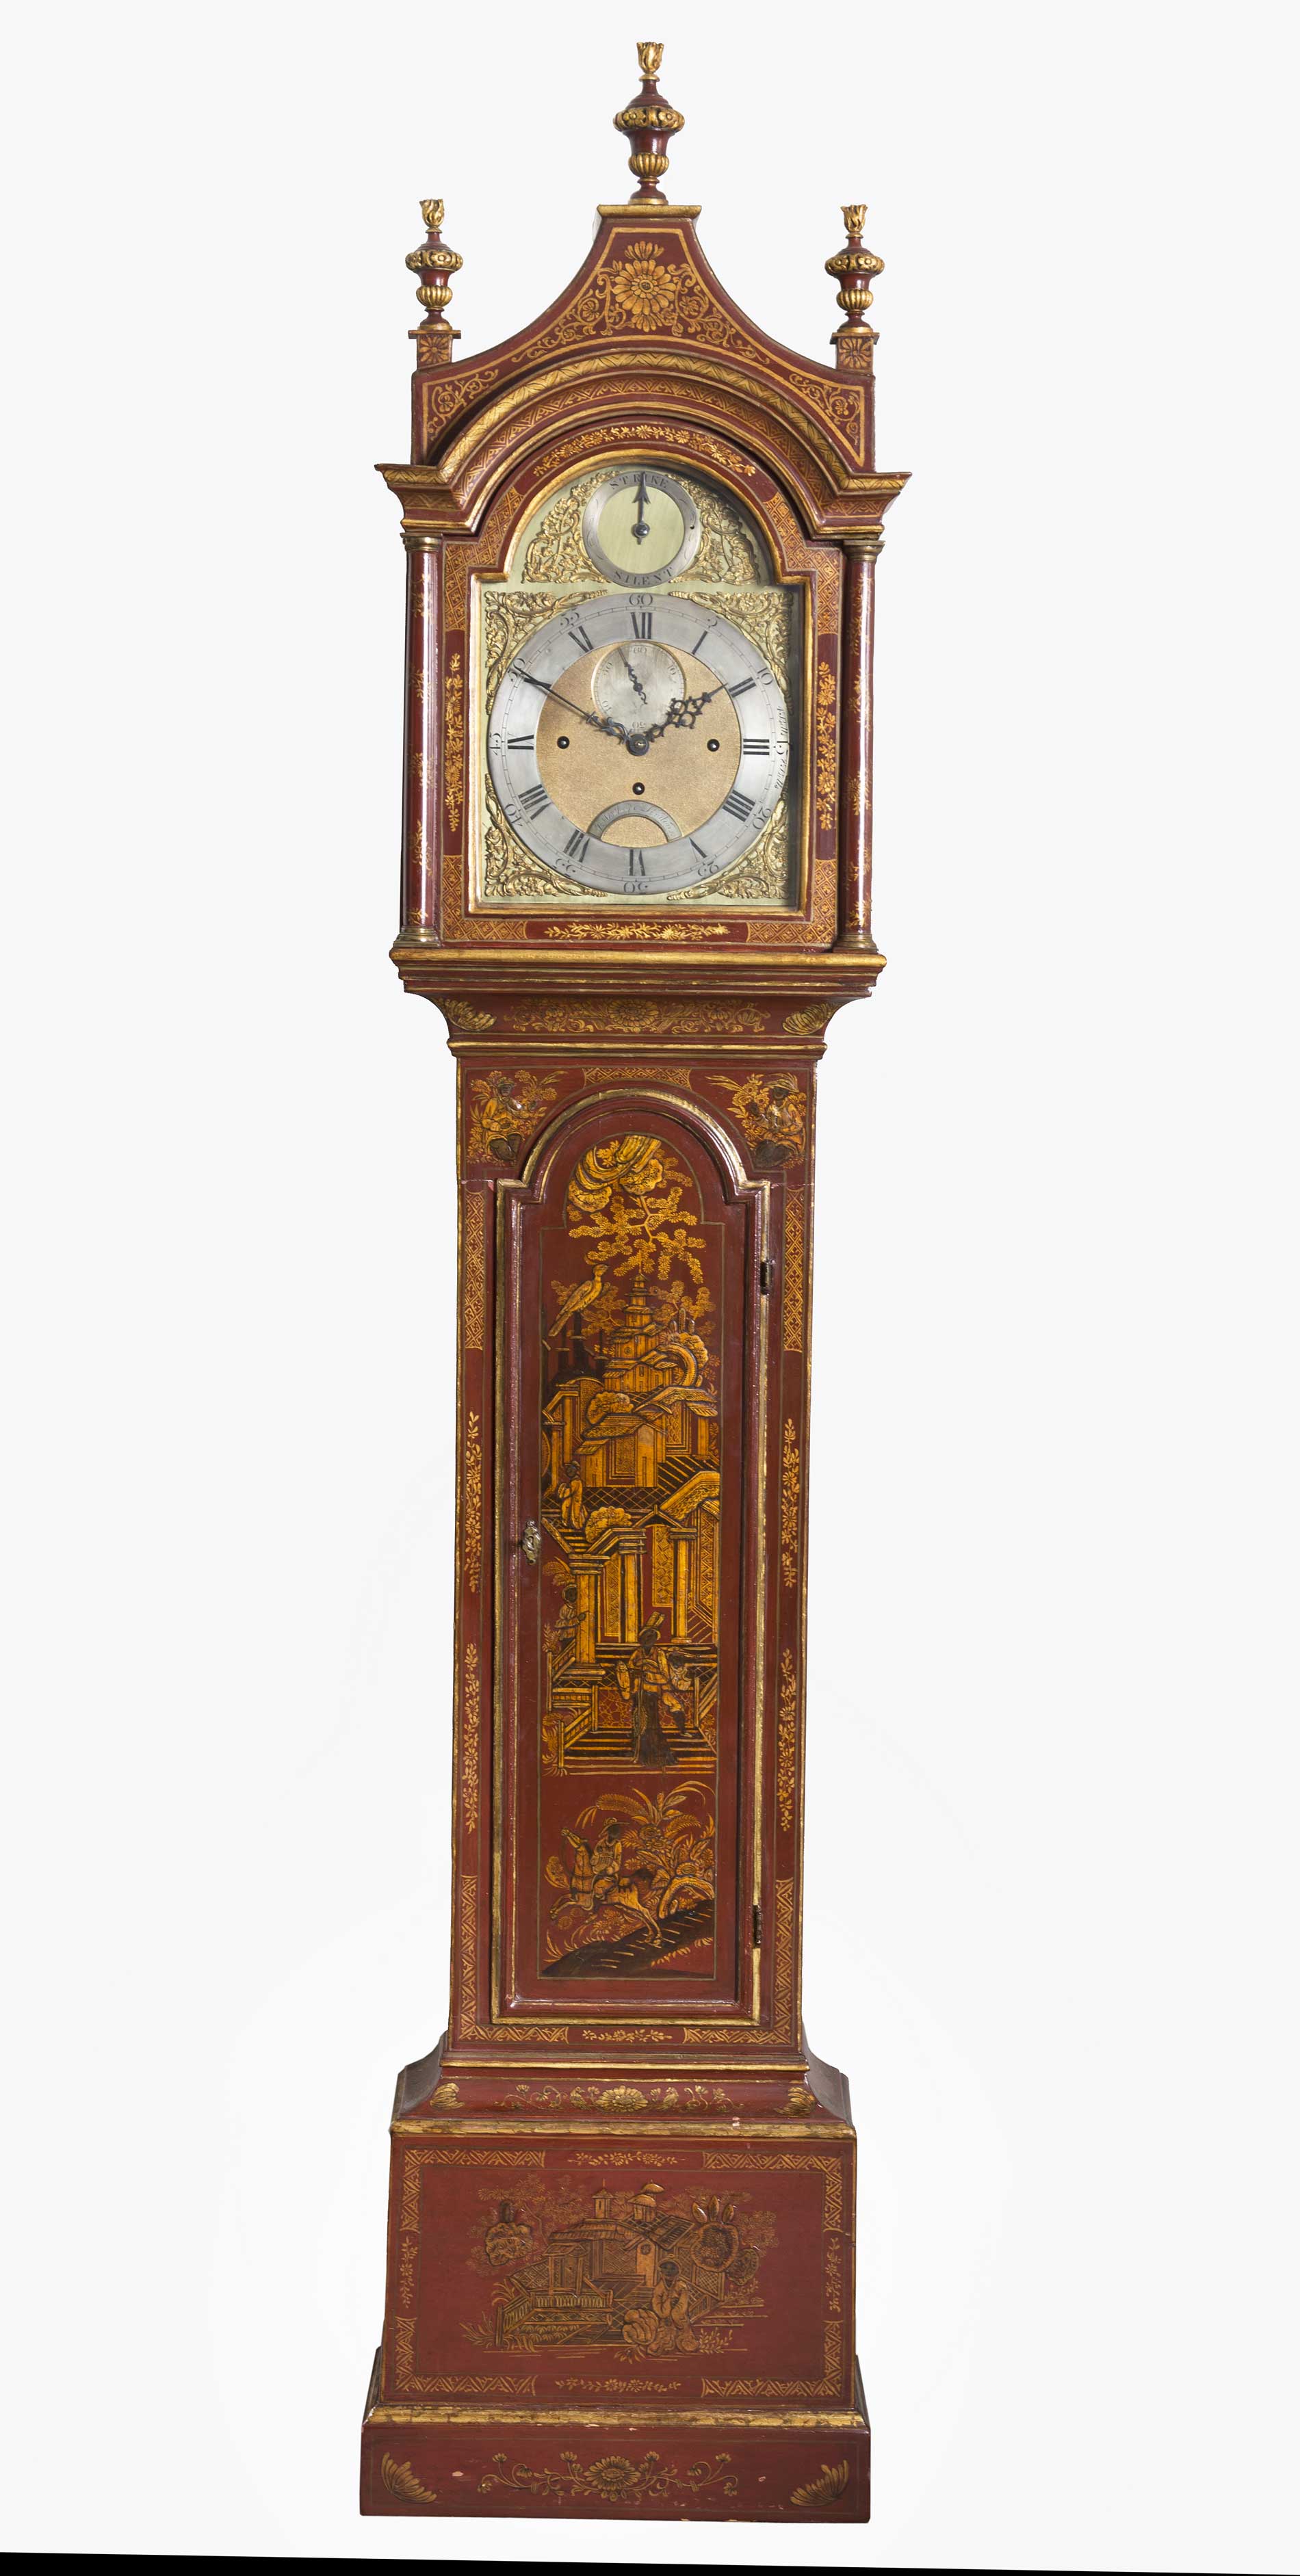 George II Red Lacquered Musical Tall Case Clock by John Northy, London, c. 1760